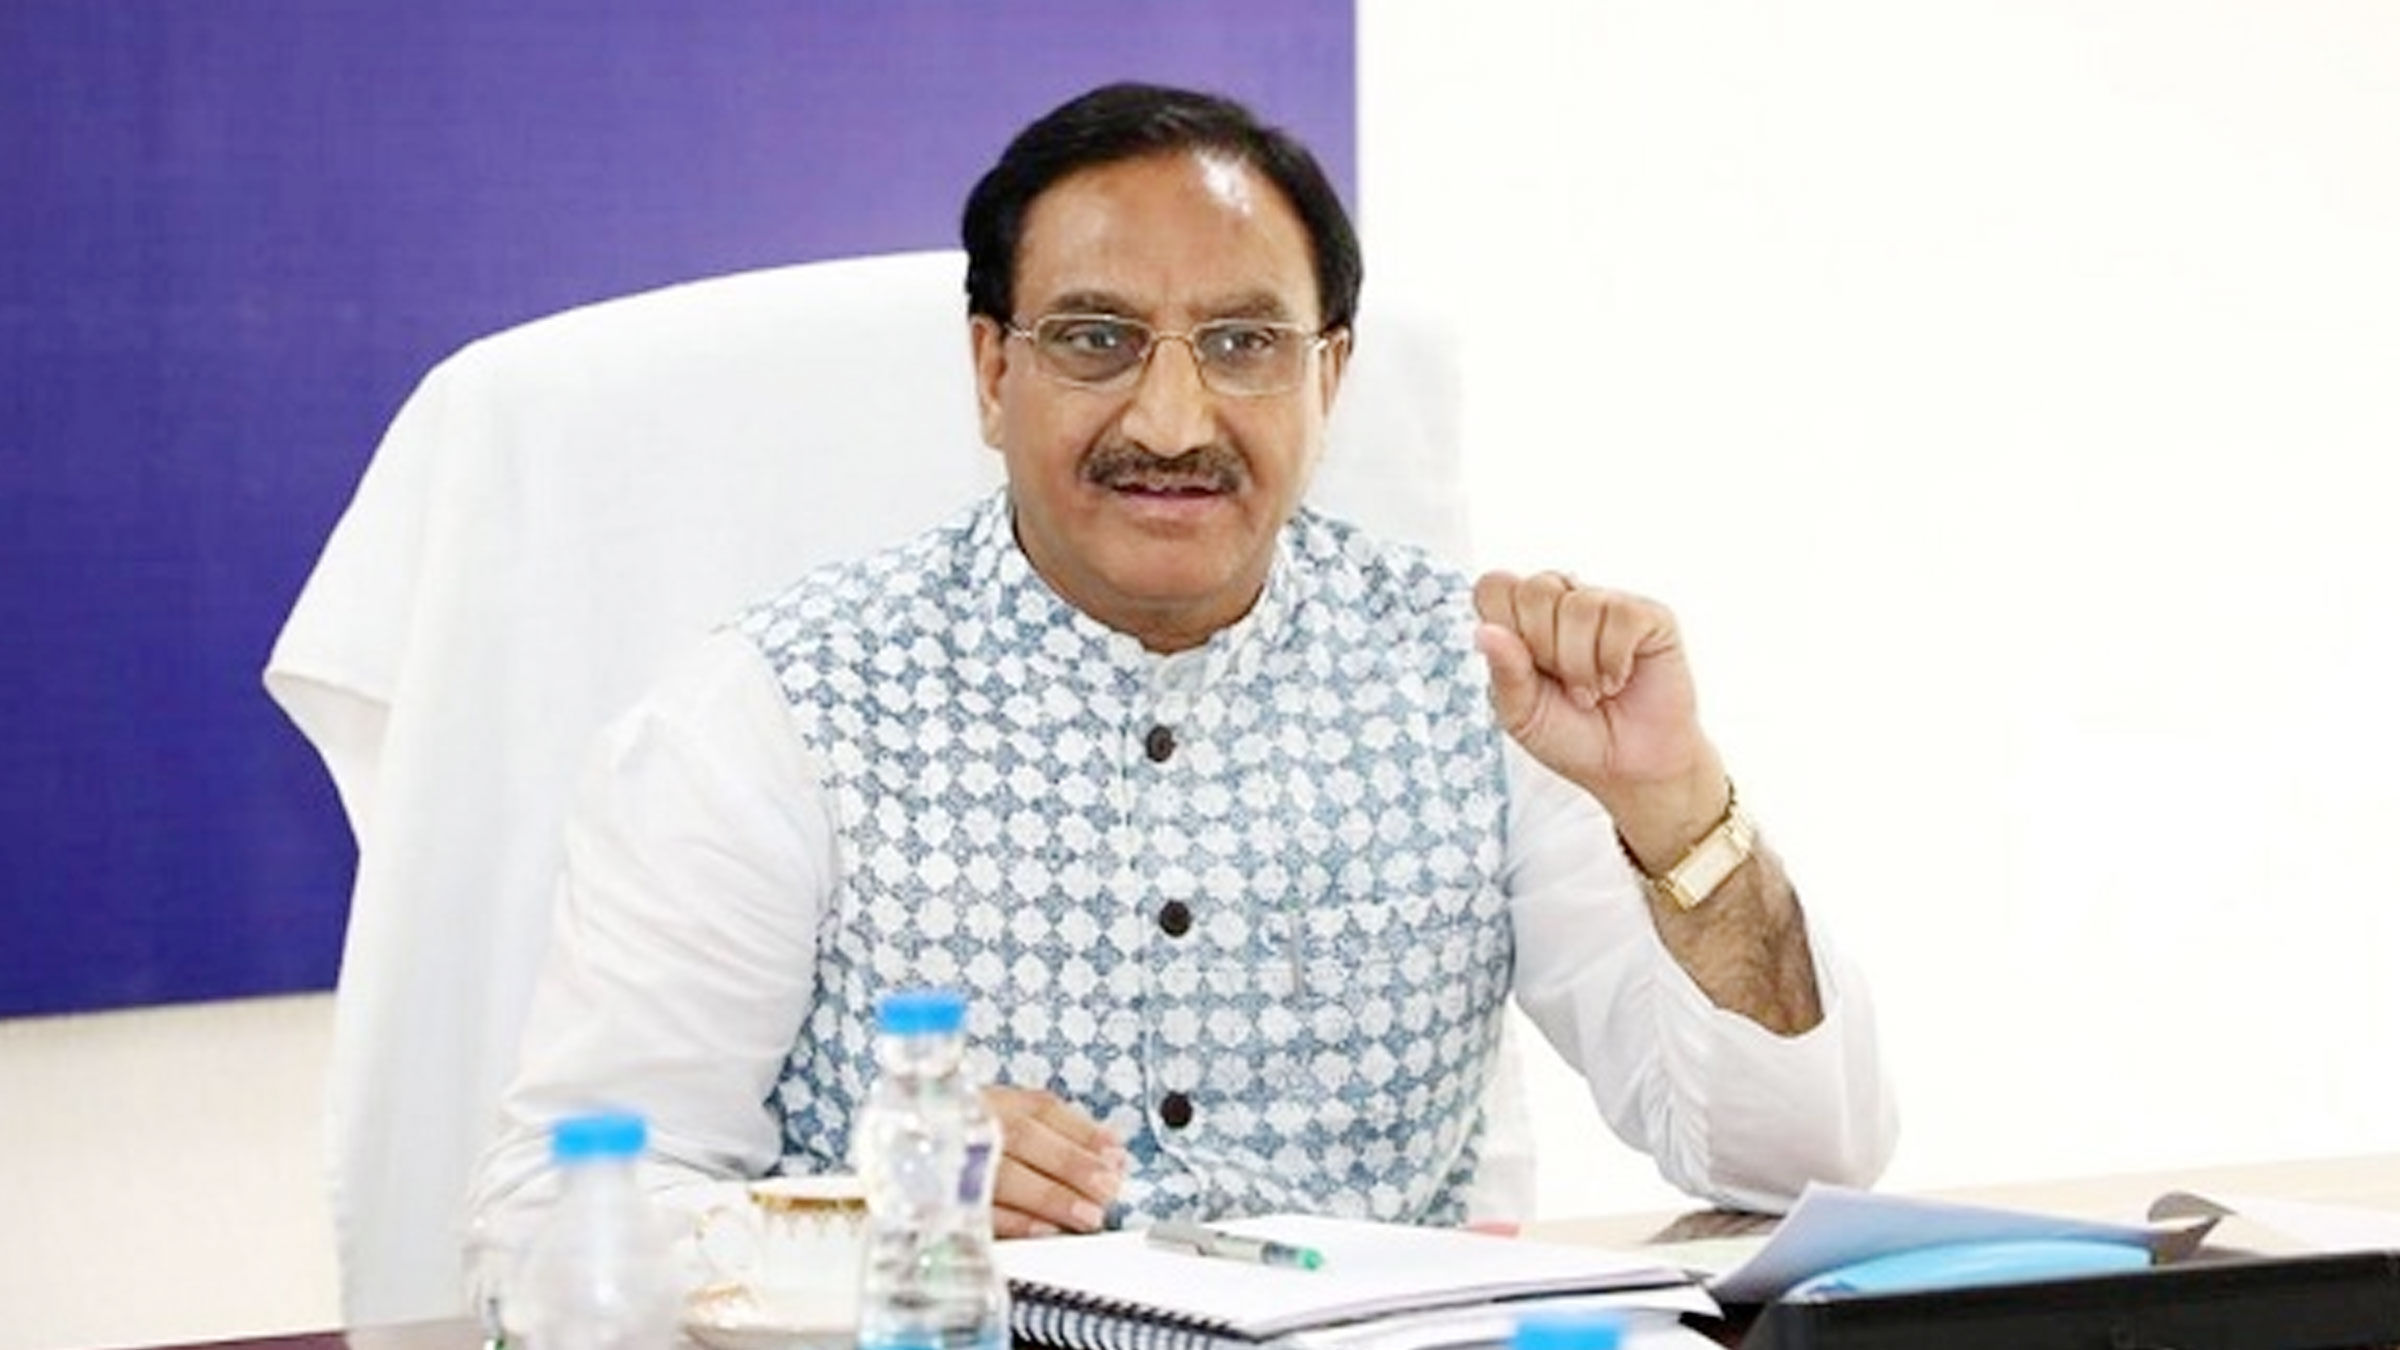 How students make better use of internet, HRD minister Ramesh Pokhriyal Nishank launches booklet